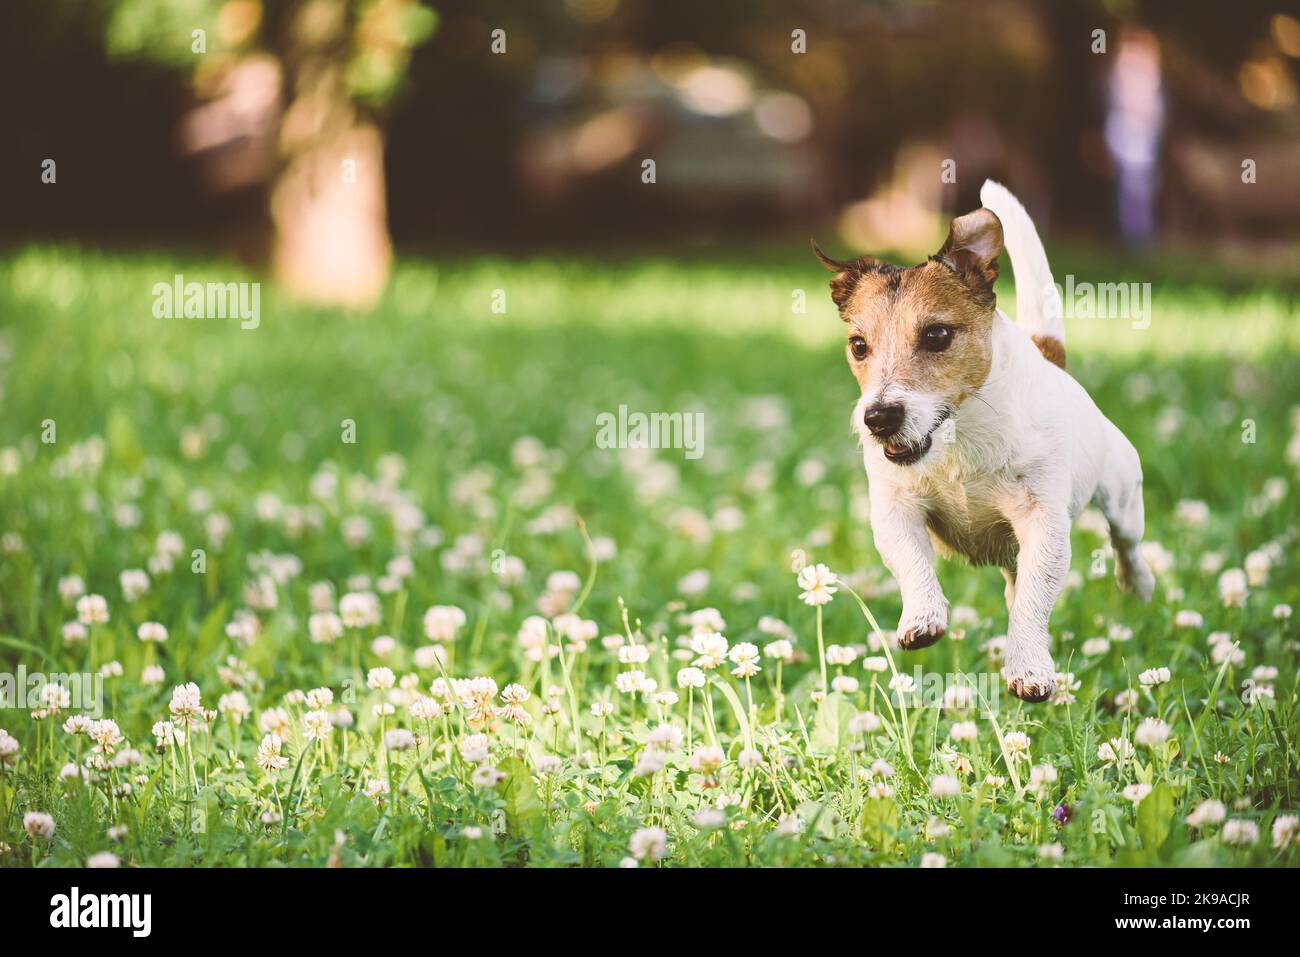 Healthy and active dog running outdoors at park lawn covered by blossom flowers and green grass Stock Photo